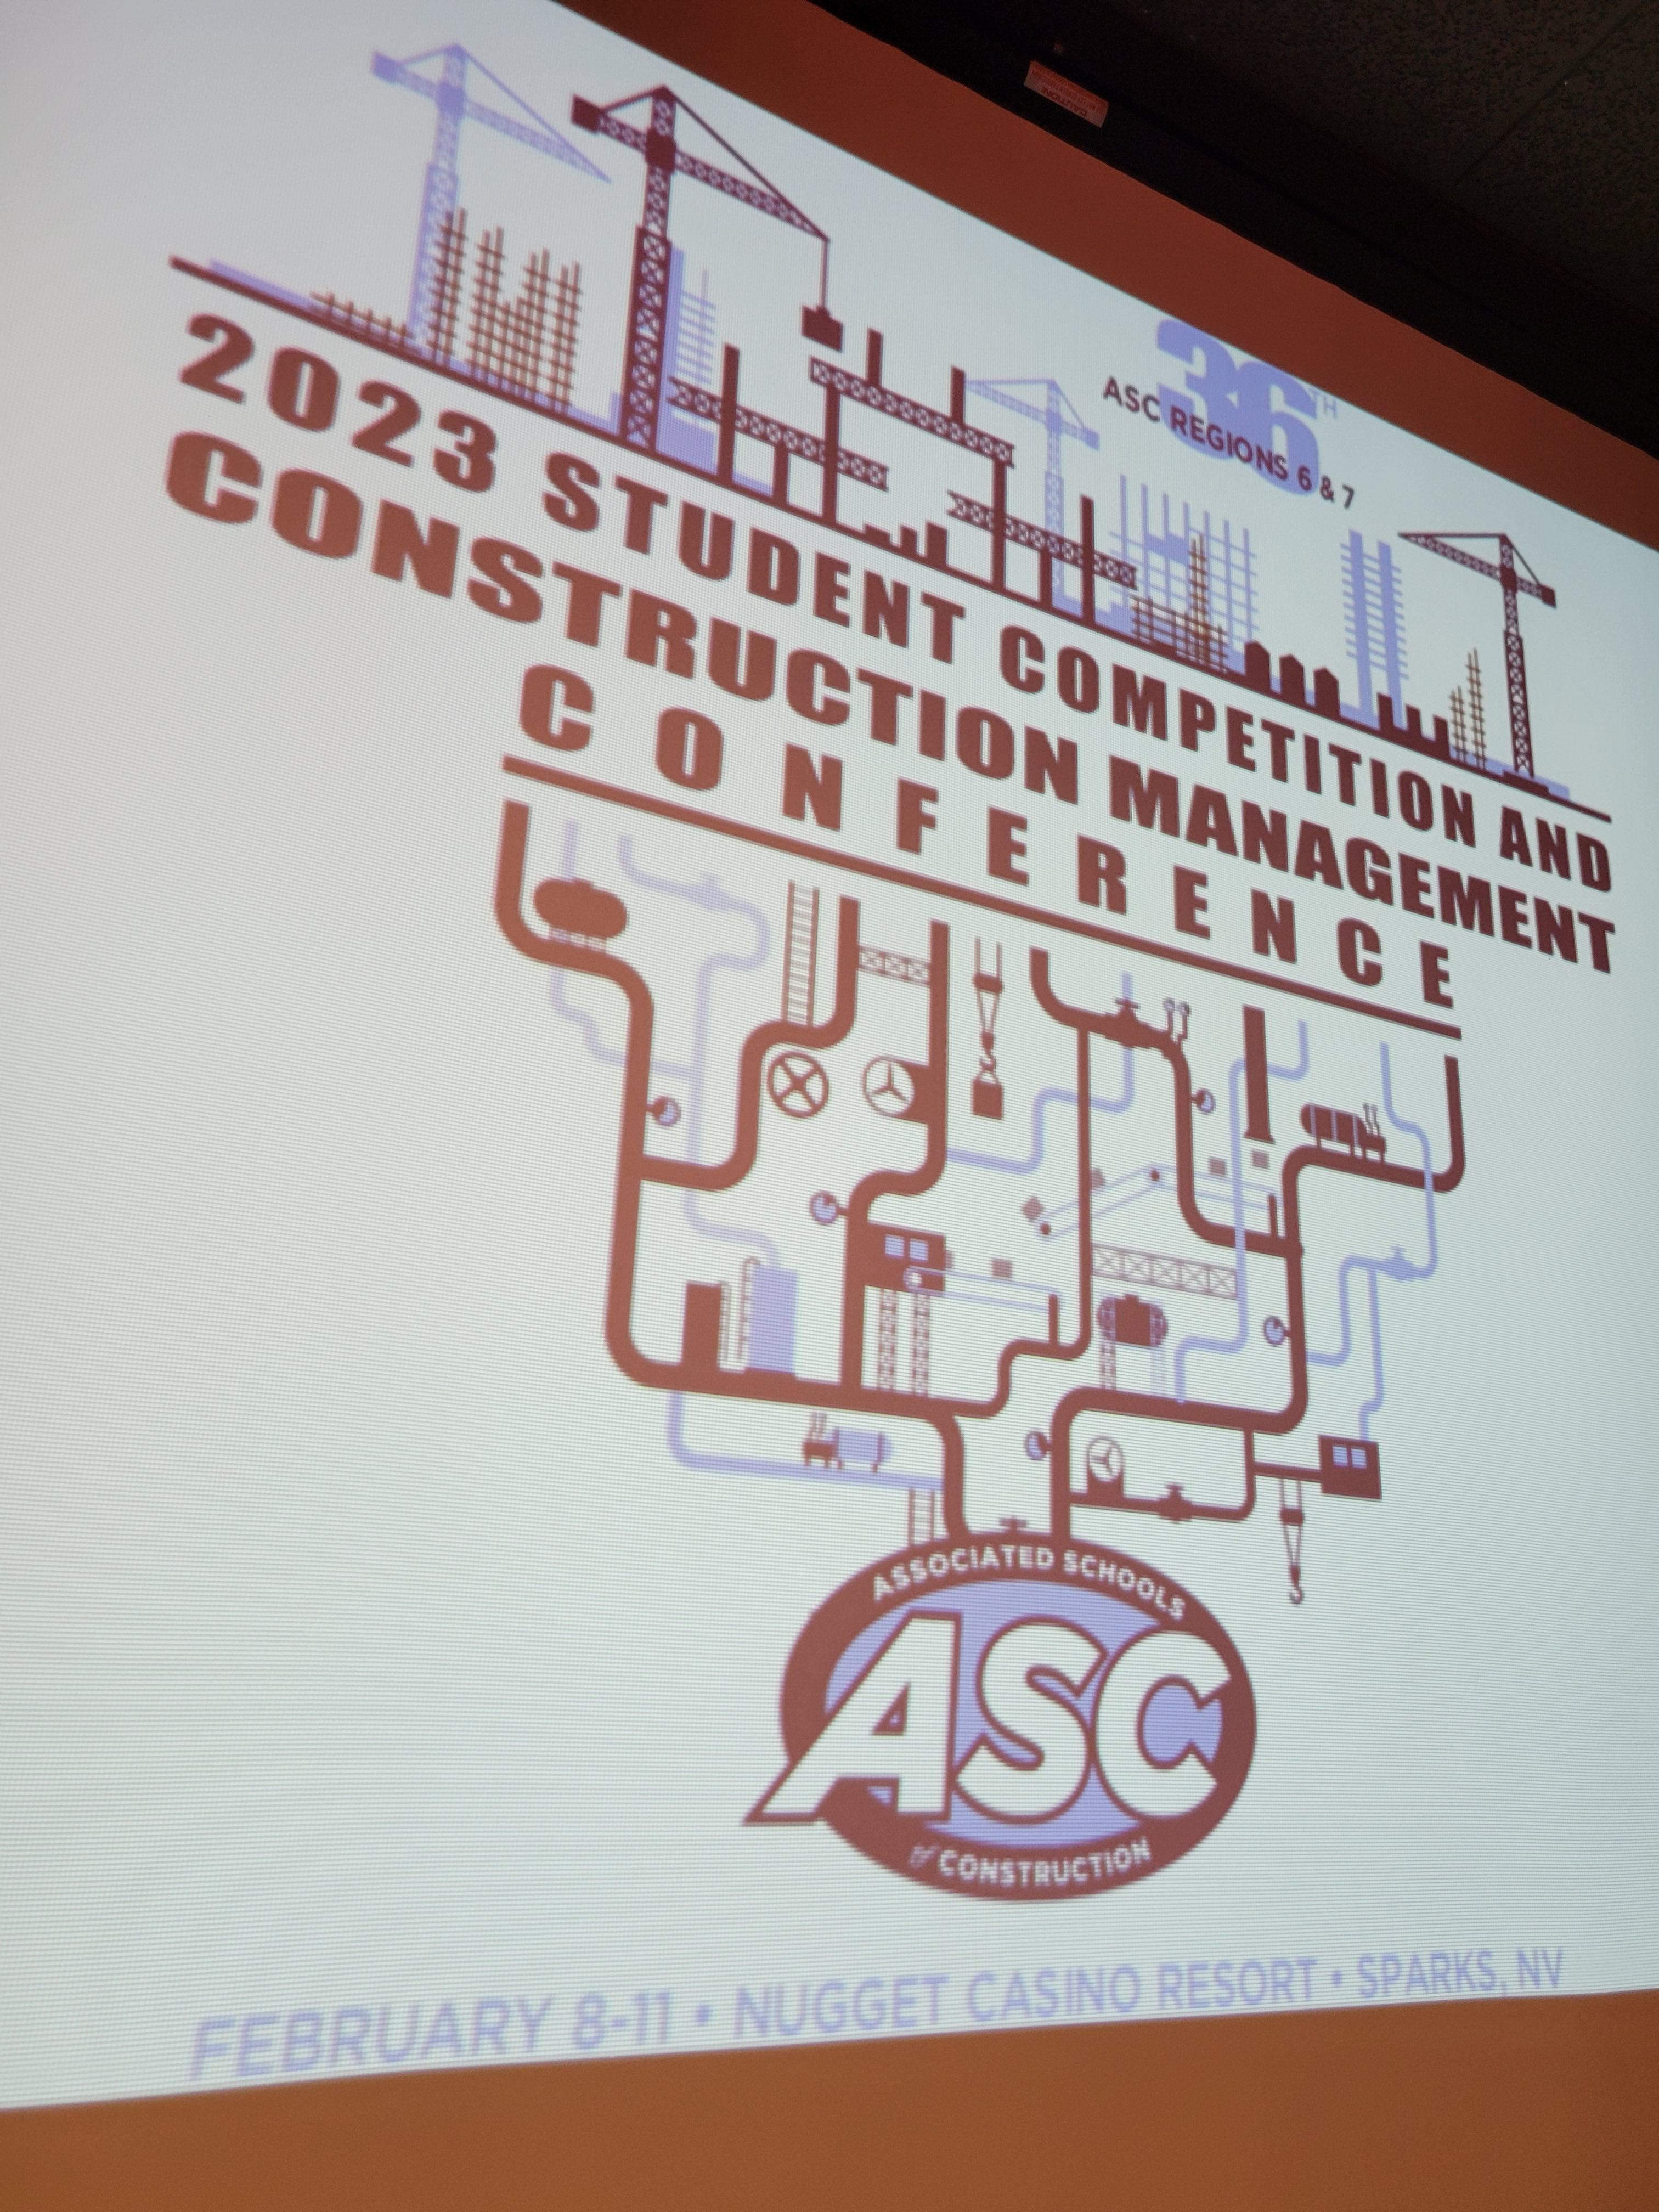 The Future is Bright – Experiencing the ASC Student Competition